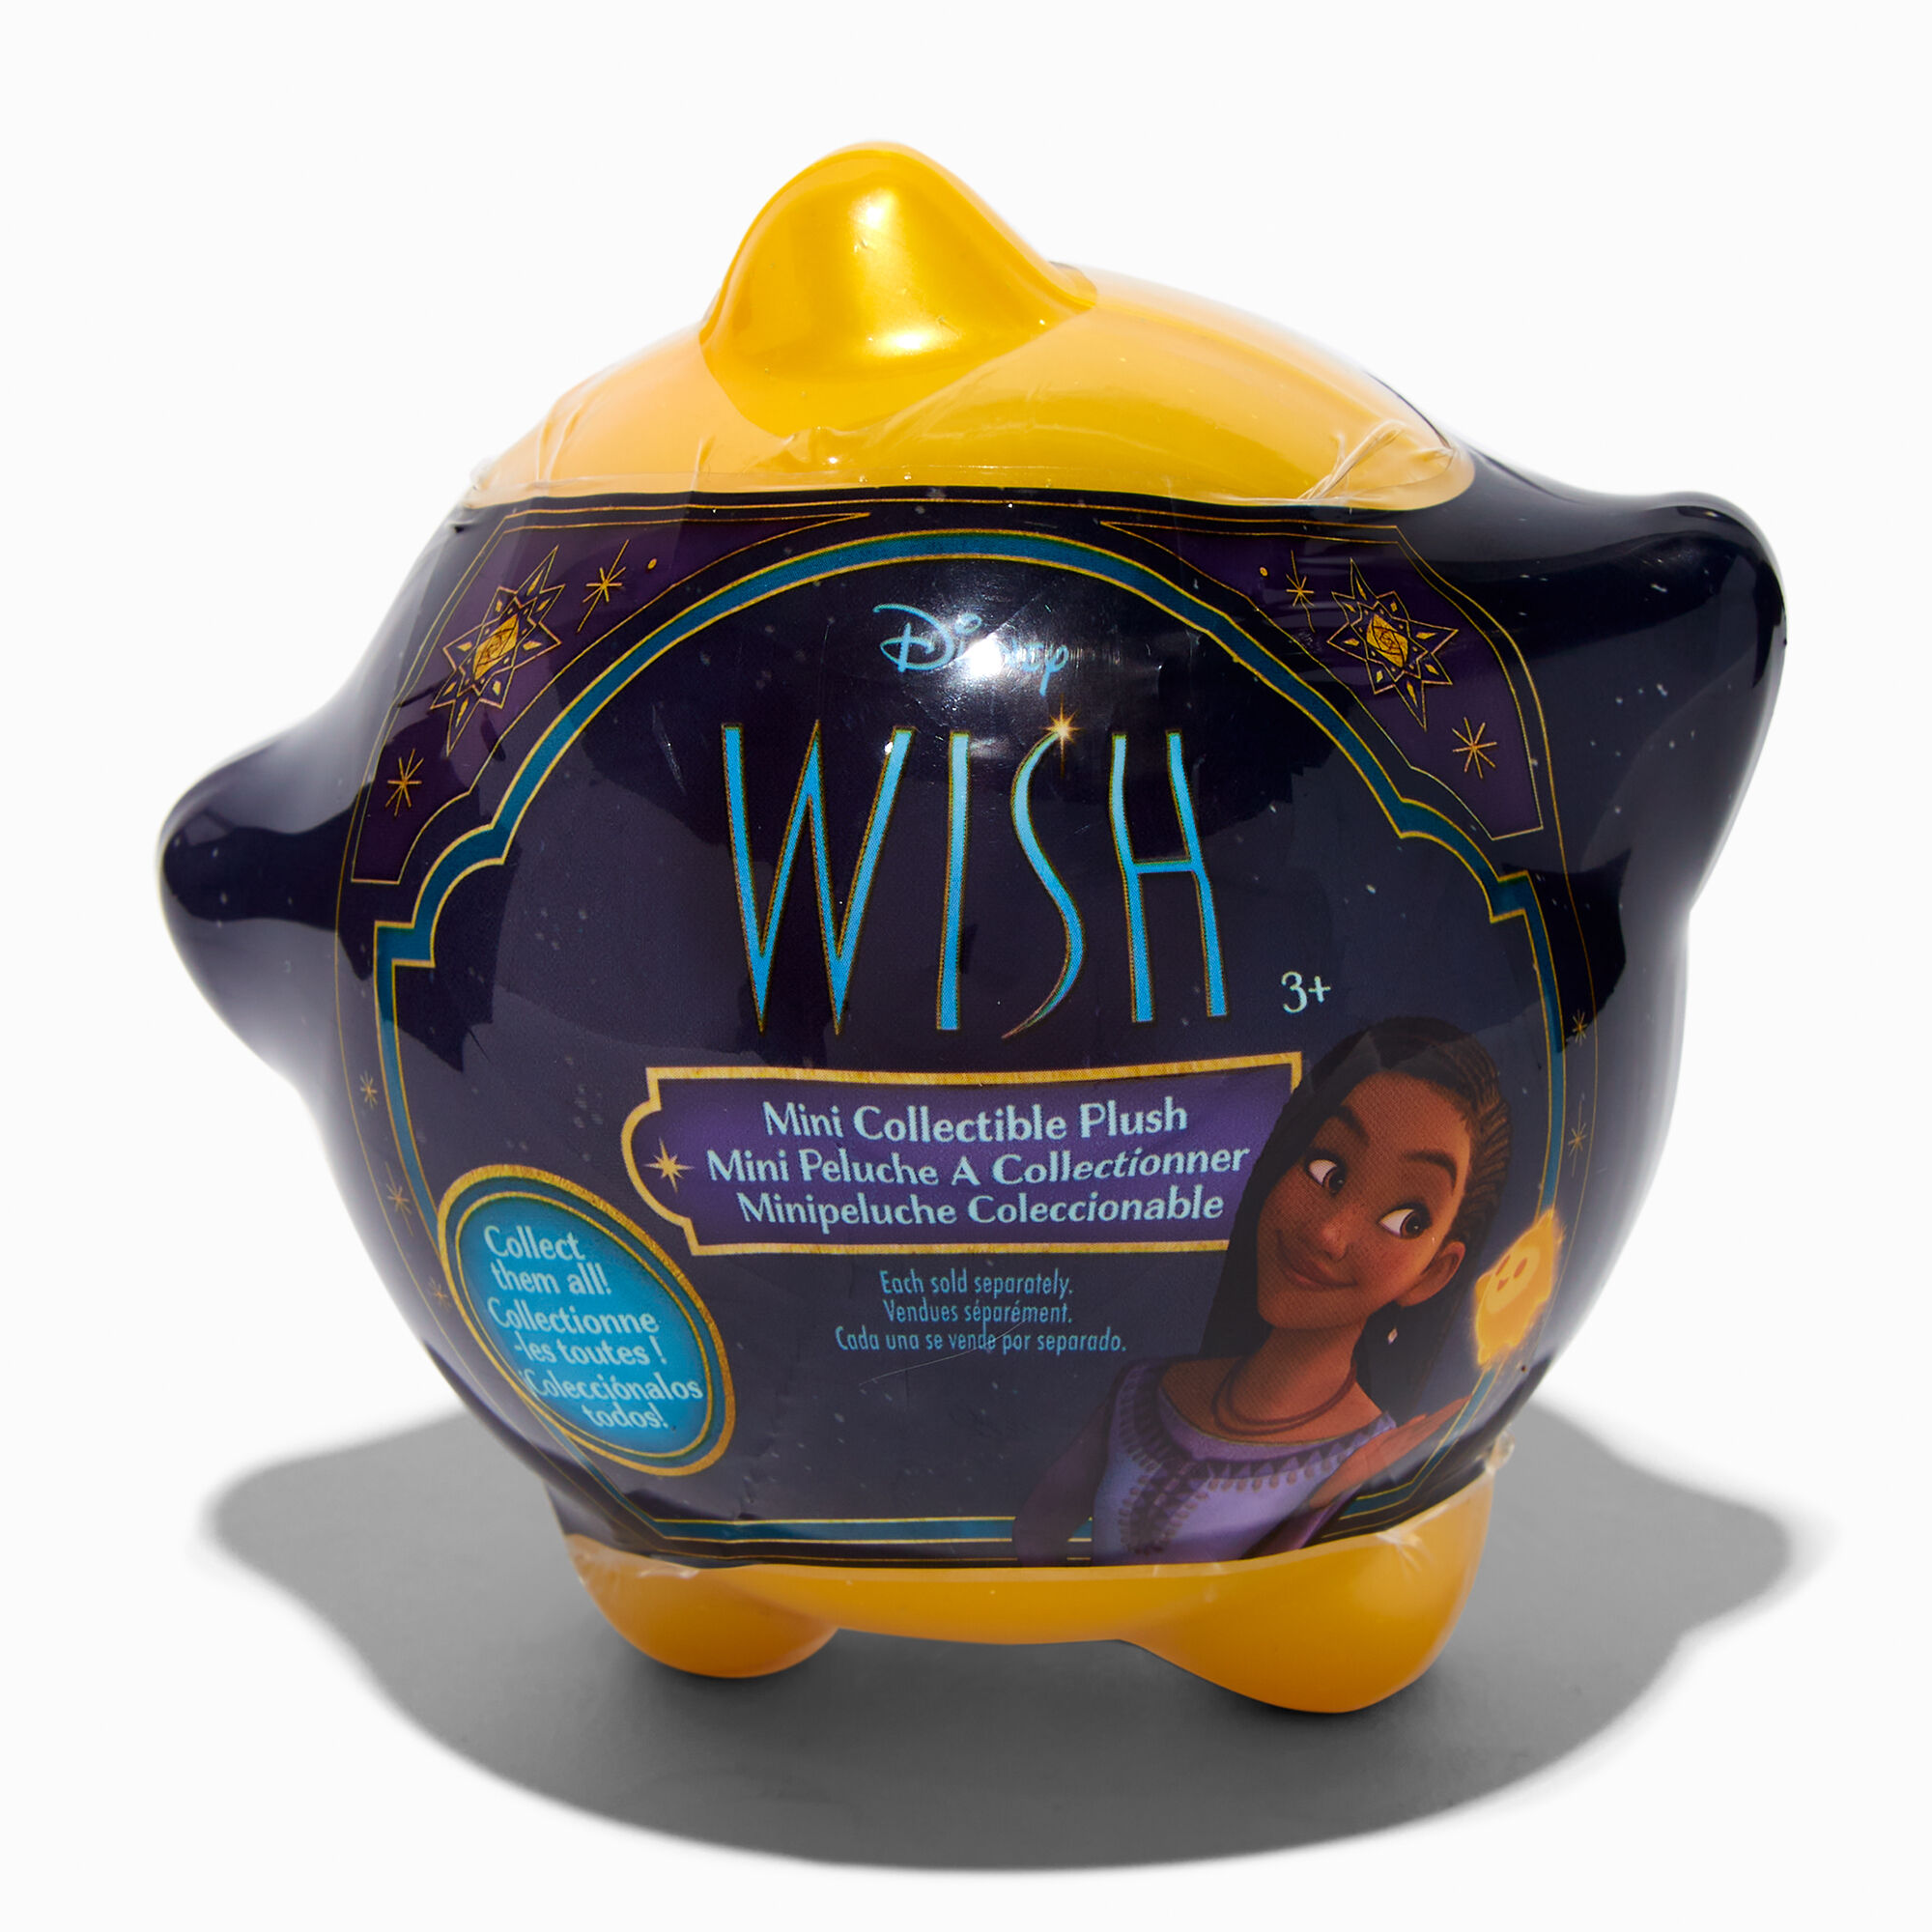 View Disney Wish Claires Exclusive Mini Collectible Plush Blind Bag Styles Vary information